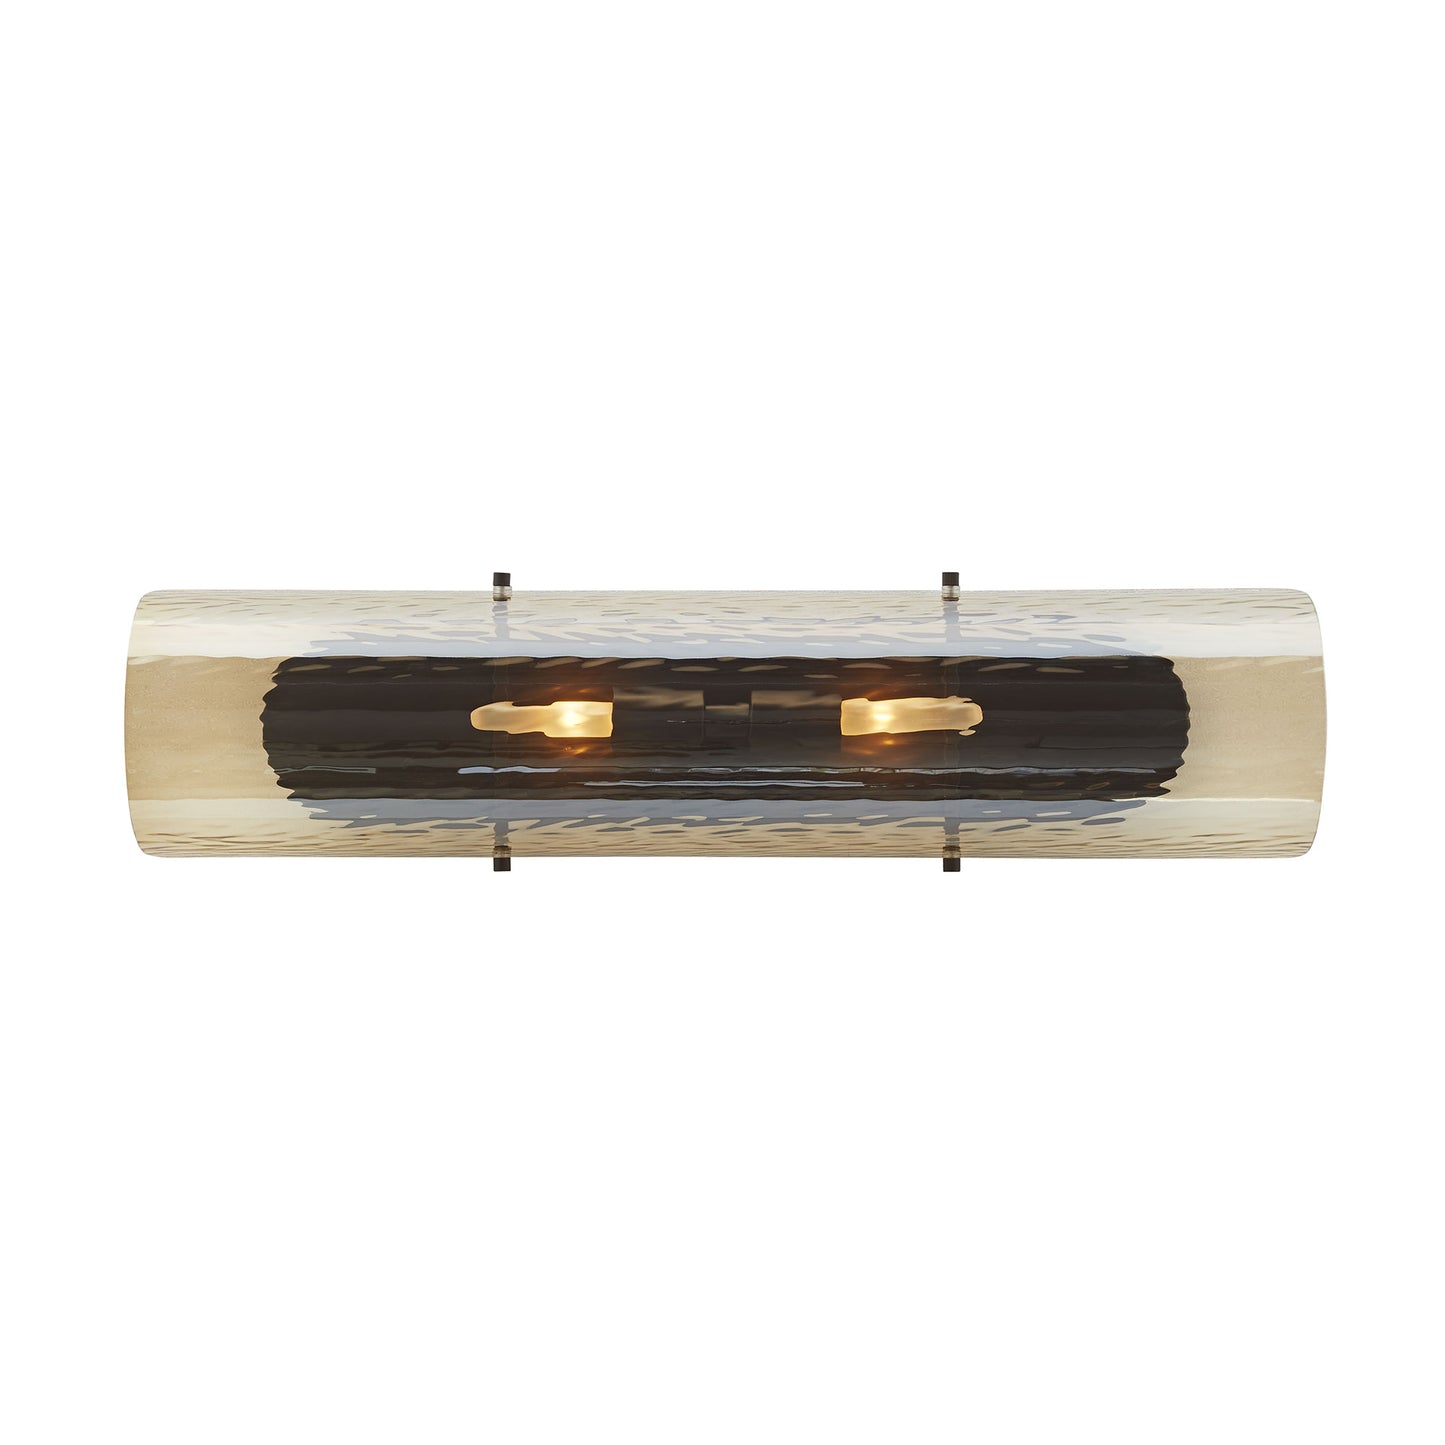 Bend Sconce - Blackened Steel, Amber Luster Glass